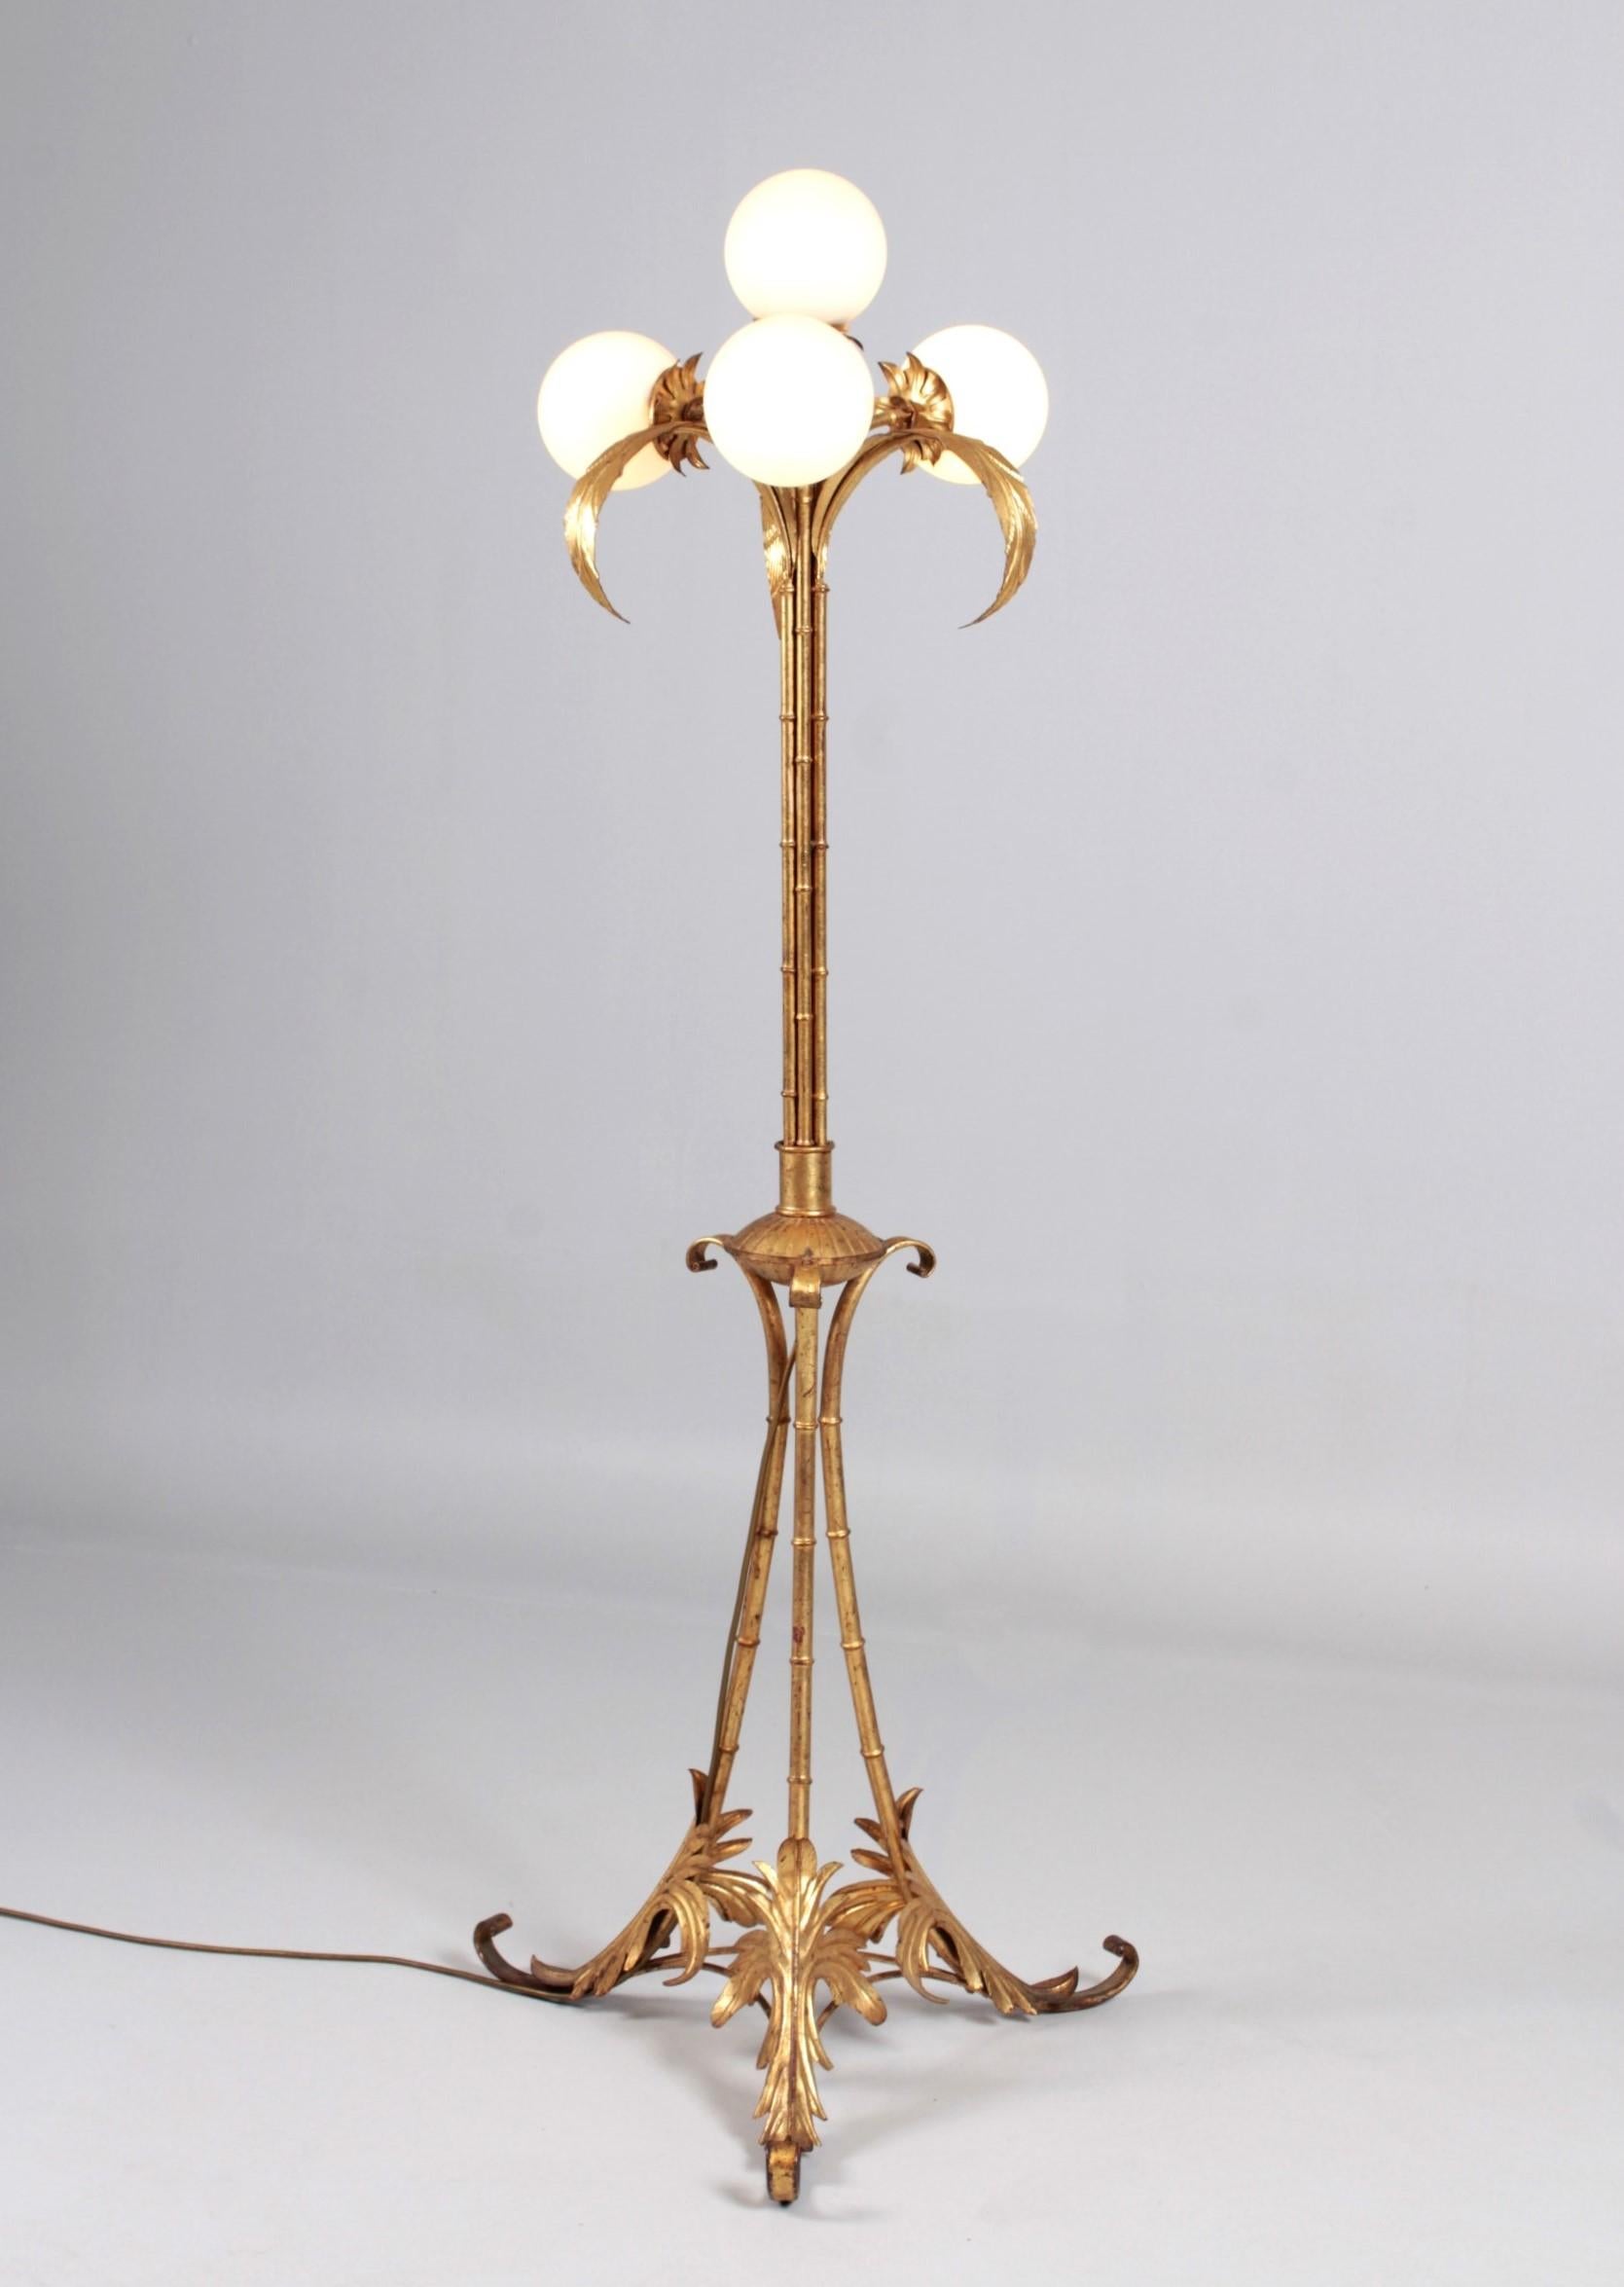 Beautiful and very large vintage floor lamp made of gold-plated brass.
Seven bundled bamboo or palm trunks grow upwards in a straight line on a three-legged base decorated with leaves. Three of the trunks end at the top in beautifully detailed palm